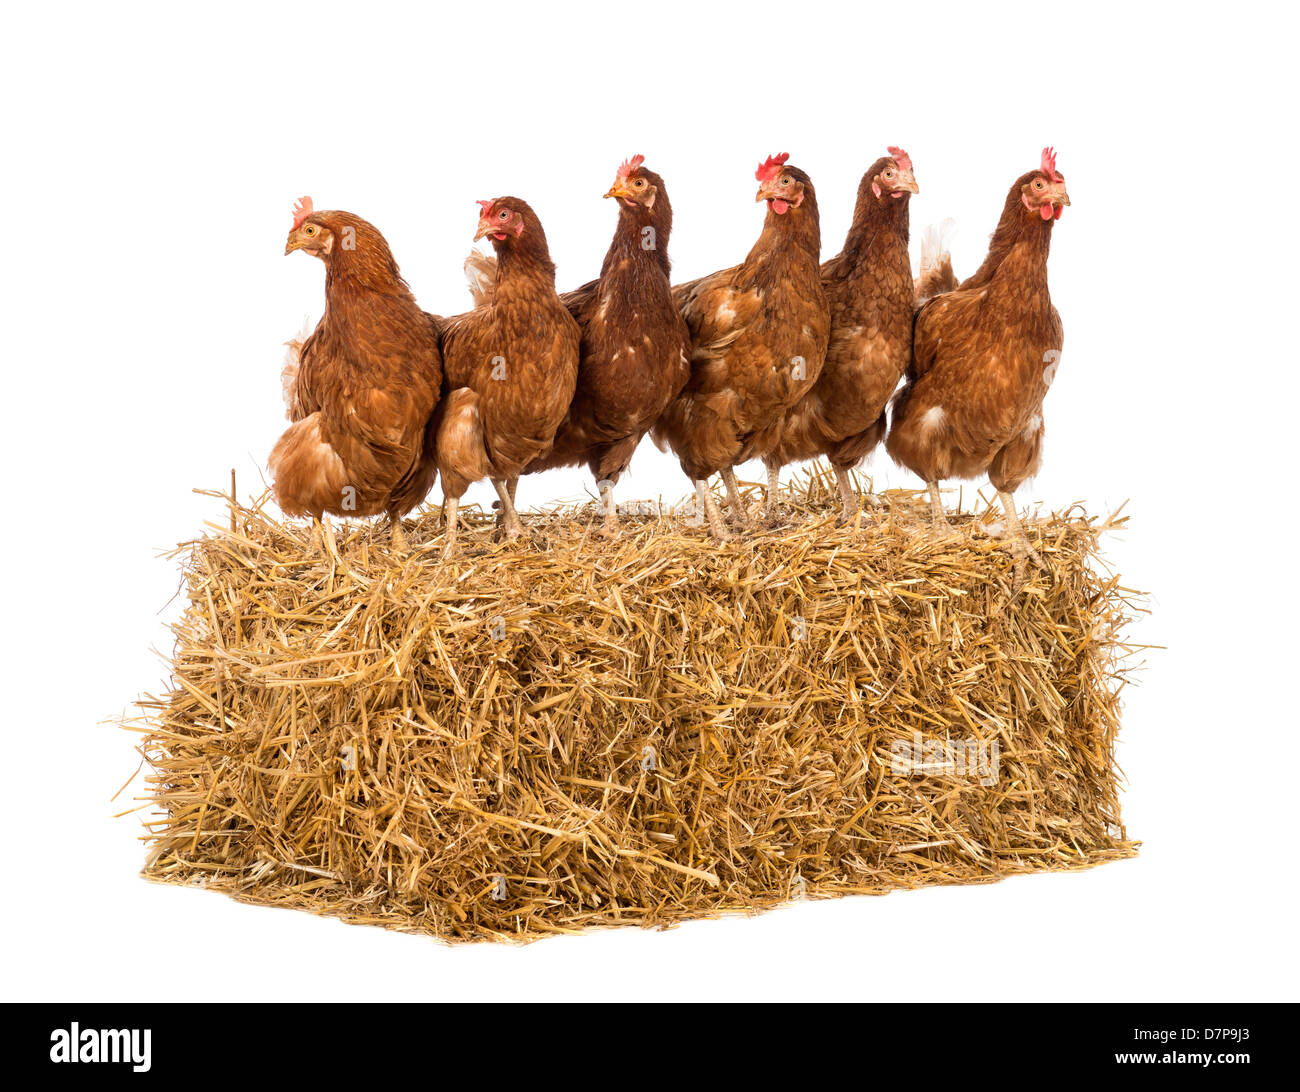 Row of hens standing on straw bale against white background Stock Photo